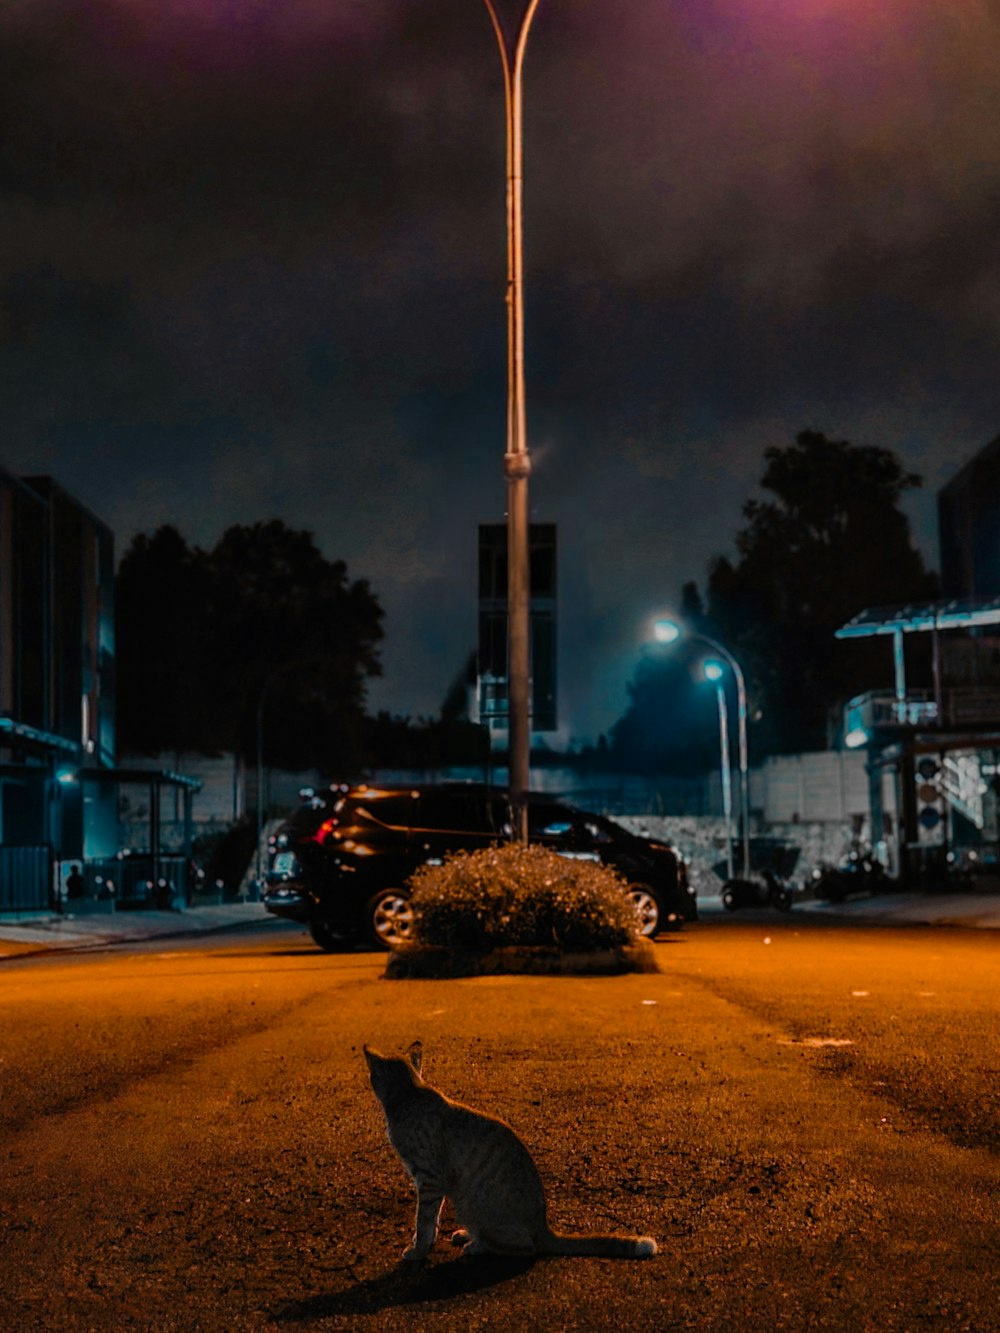 a cat sitting on the ground under a street light